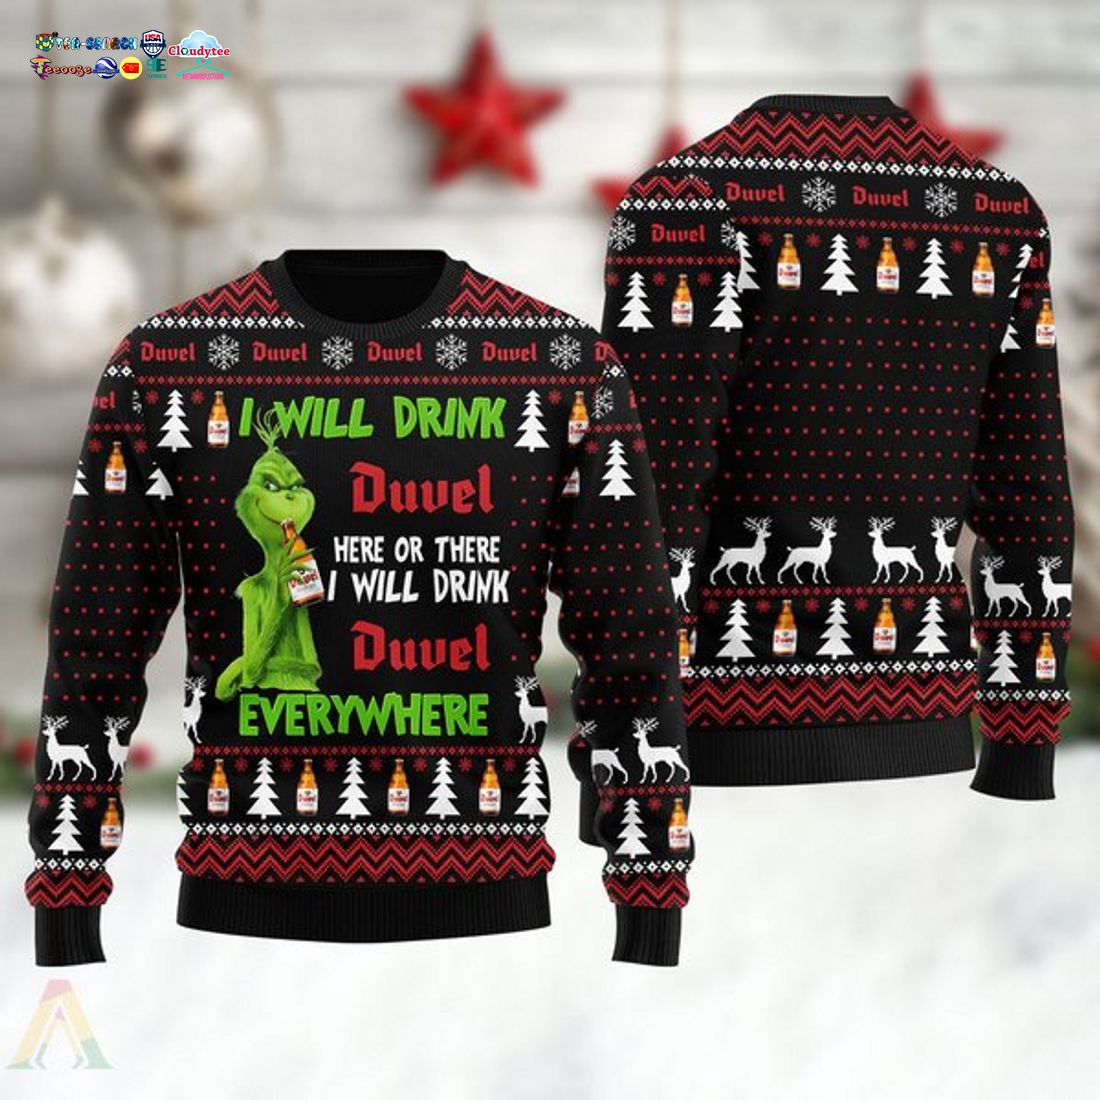 Grinch I Will Drink Duvel Everywhere Ugly Christmas Sweater